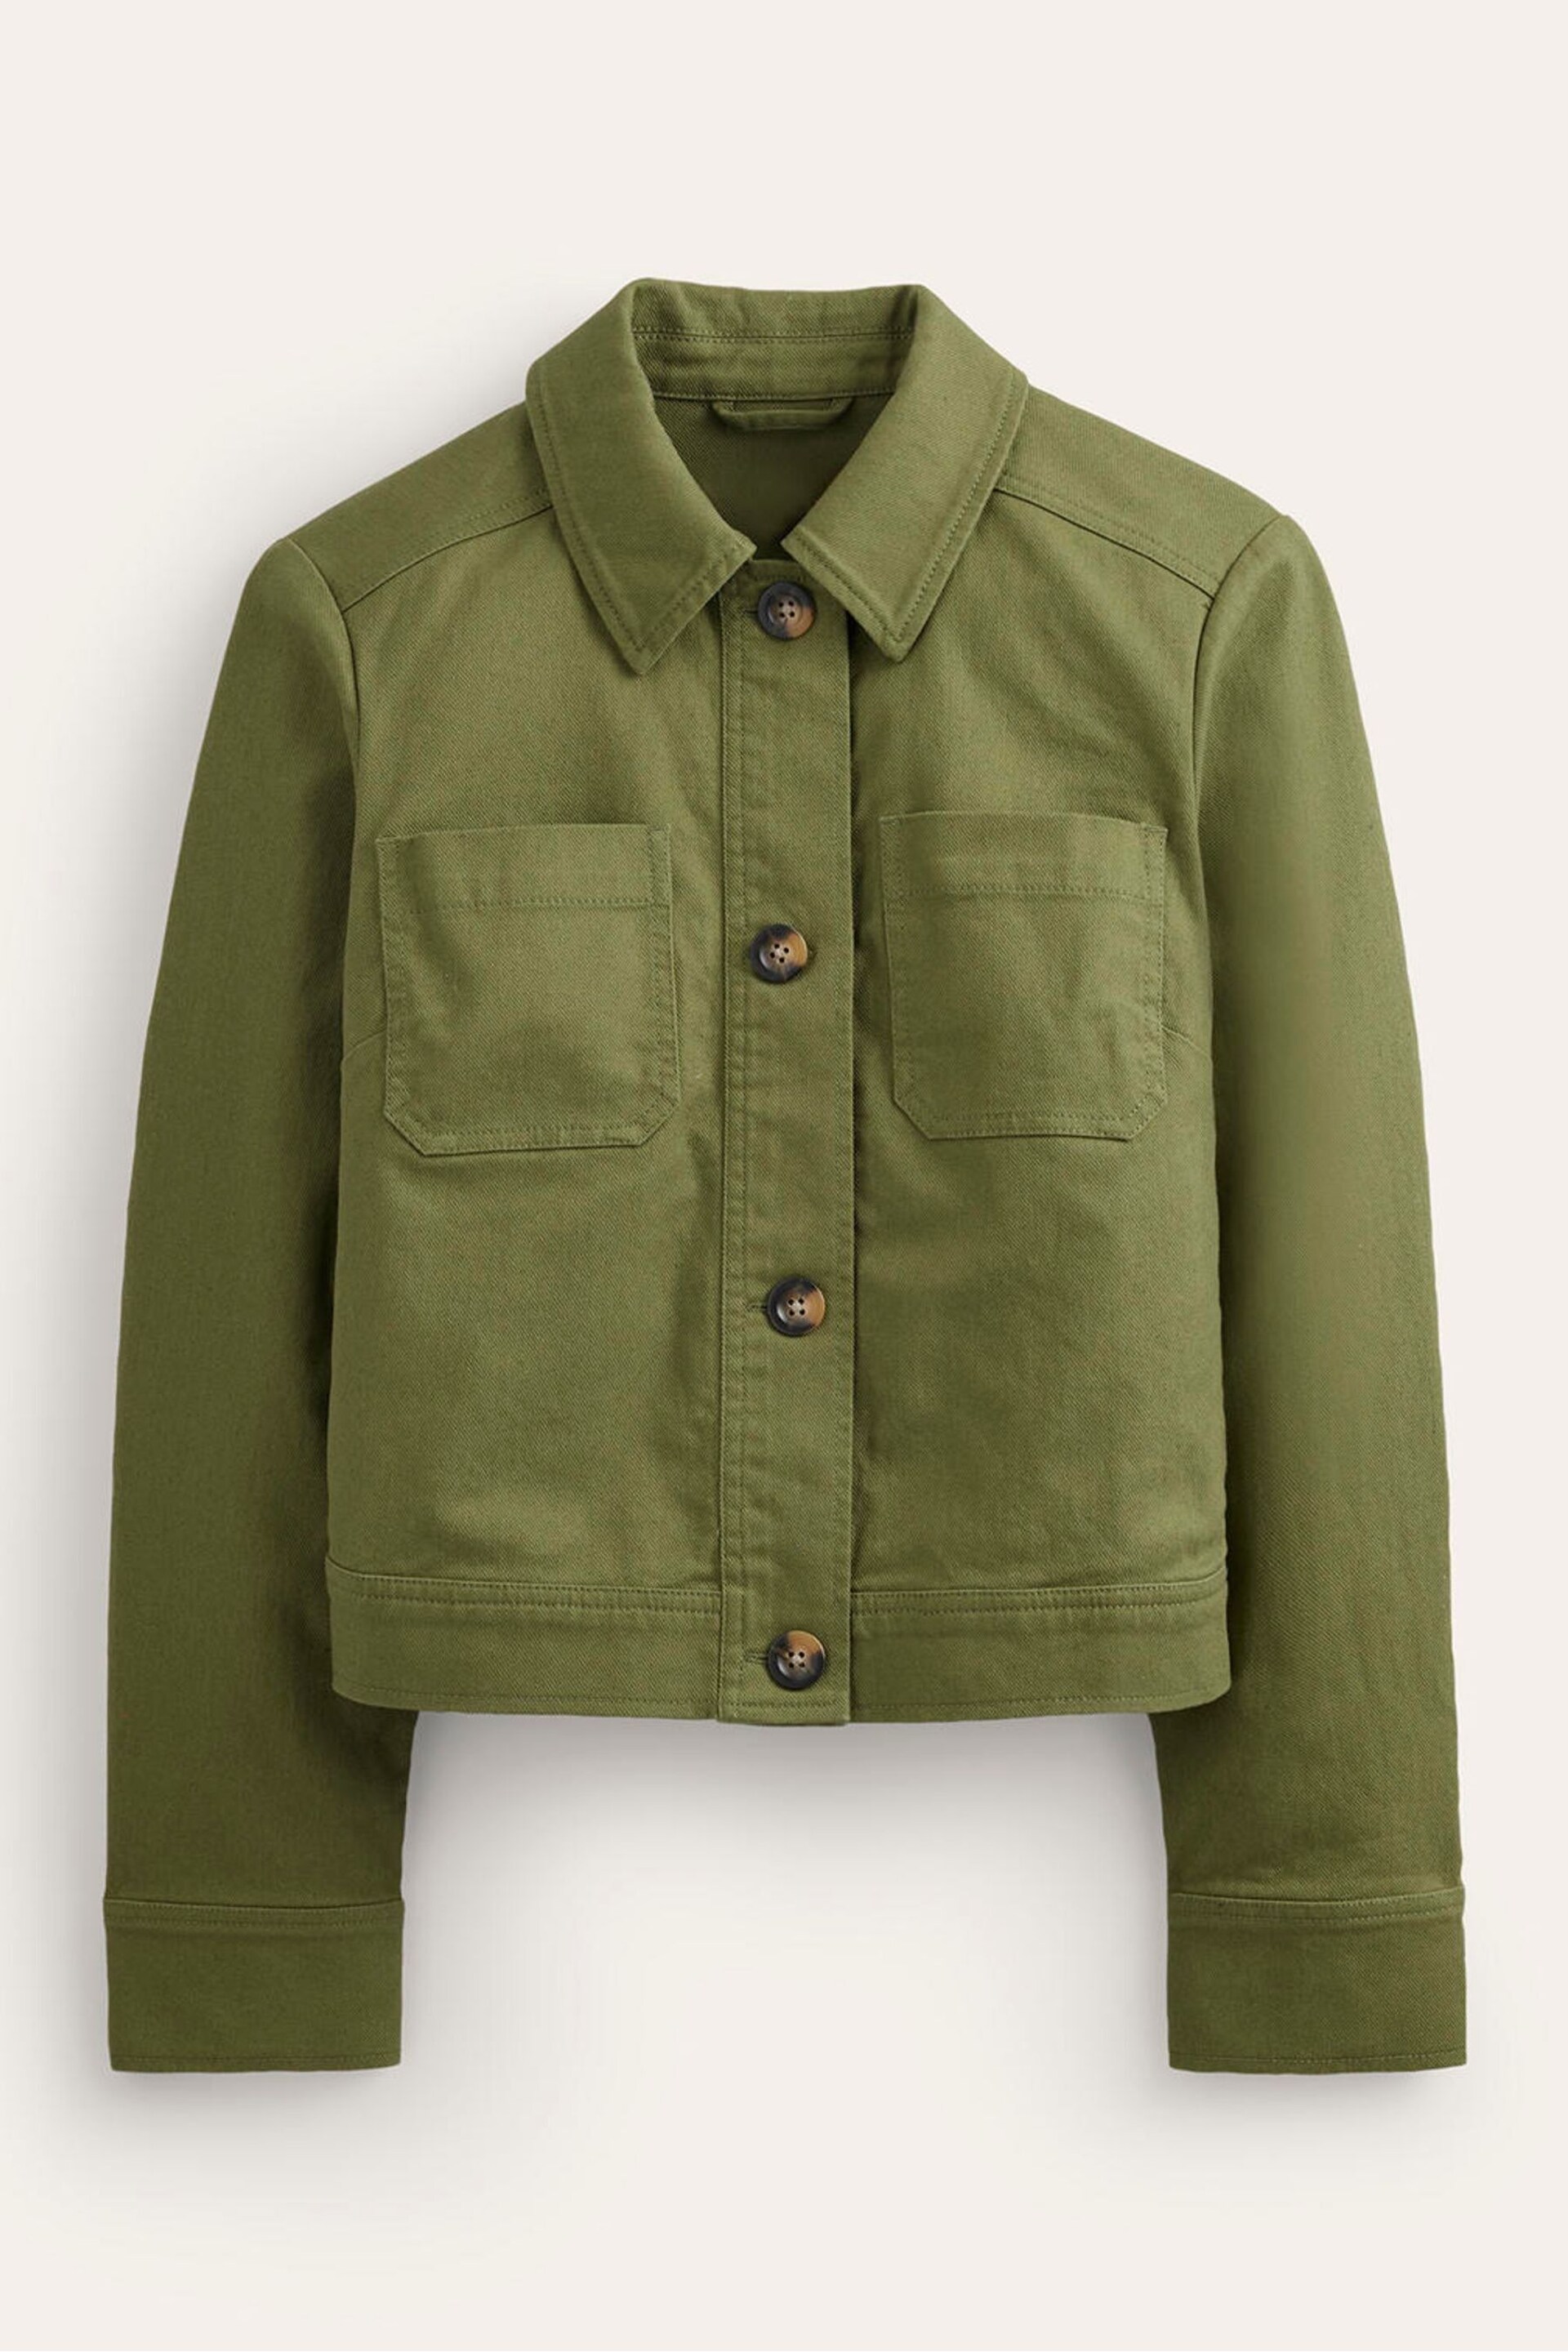 Boden Green Casual Crop Jacket - Image 6 of 6